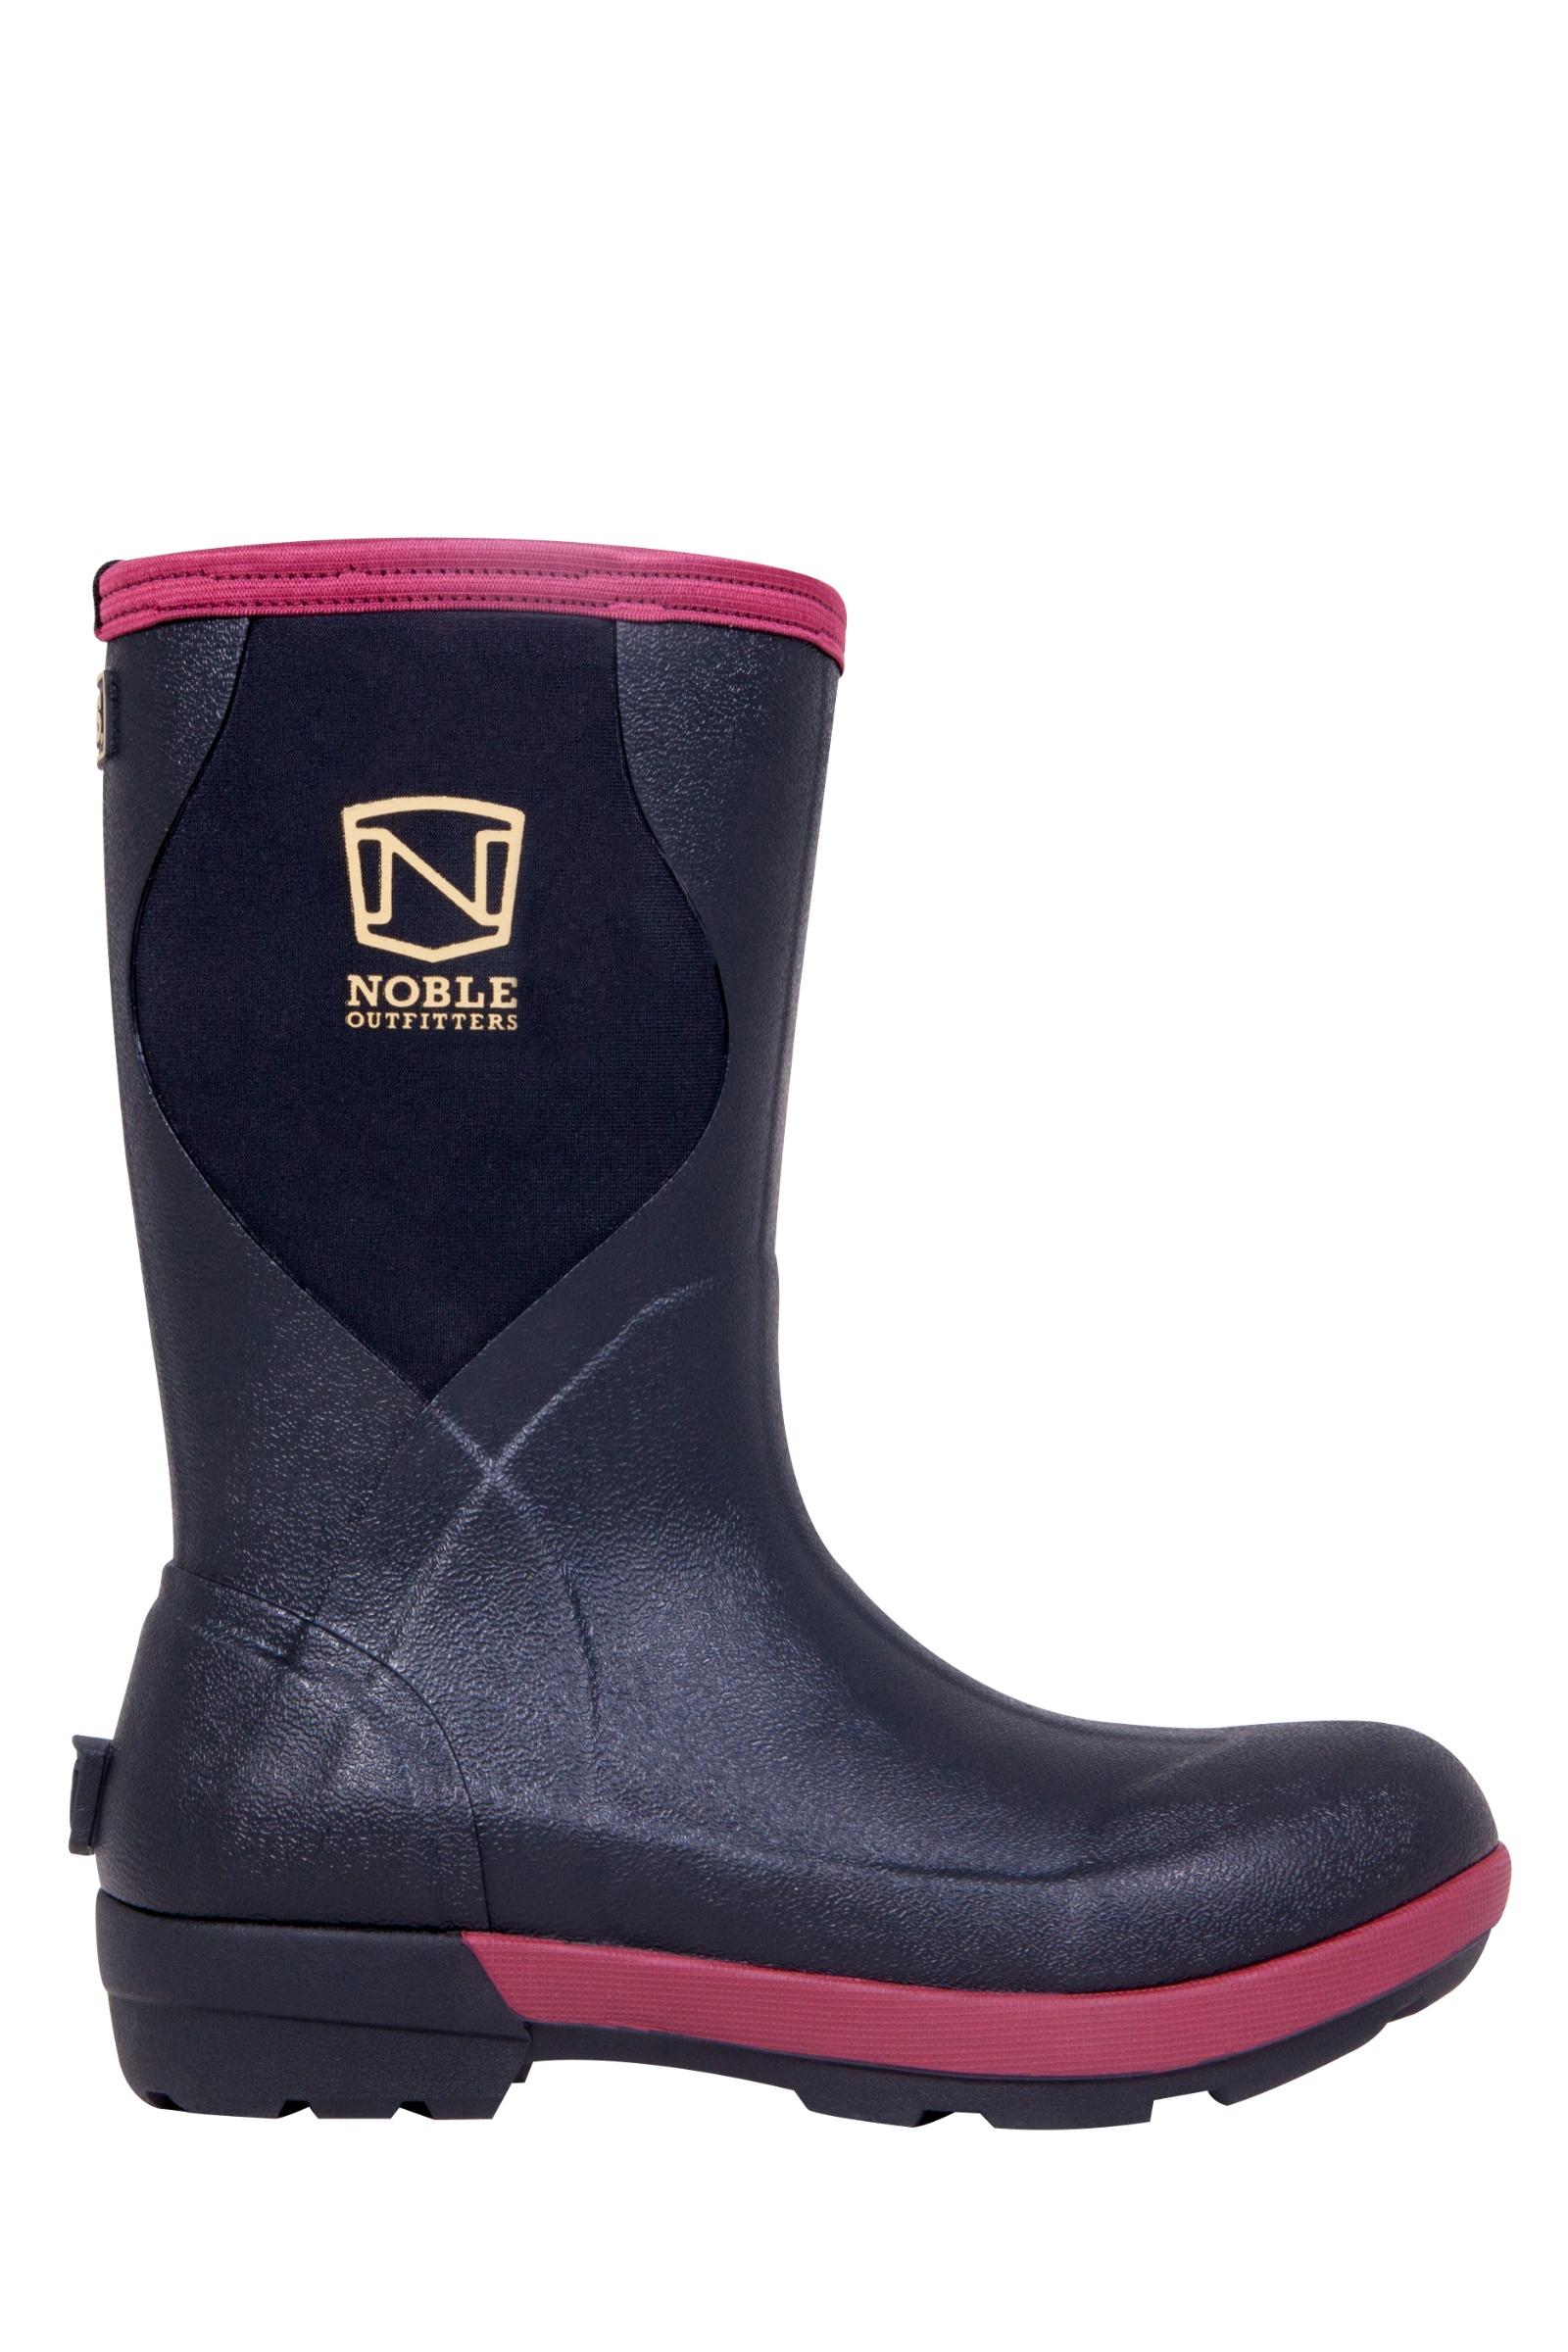 Noble Outfitters Women's MUDS Mid Boots